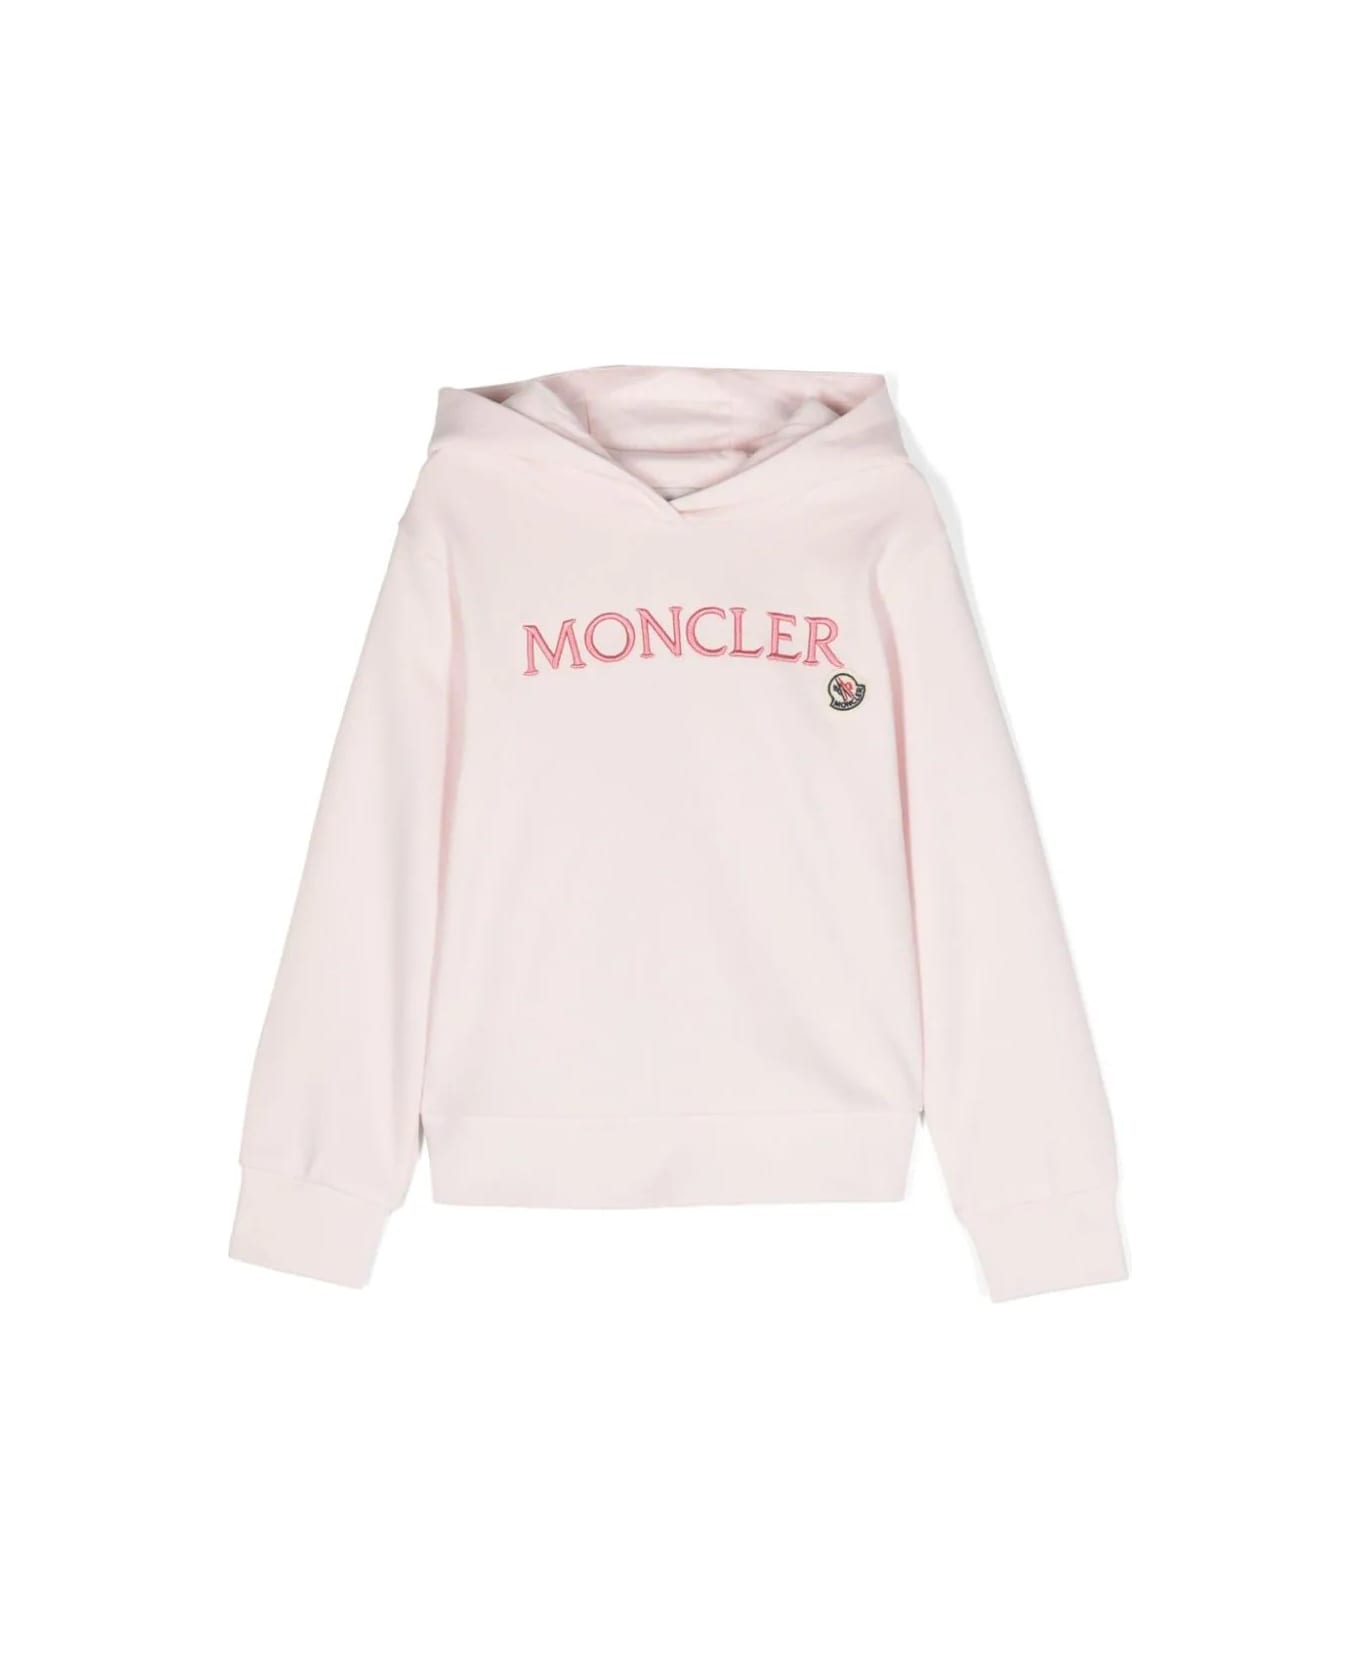 Moncler Pink Hoodie With Embroidered Lettering Logo - Pink